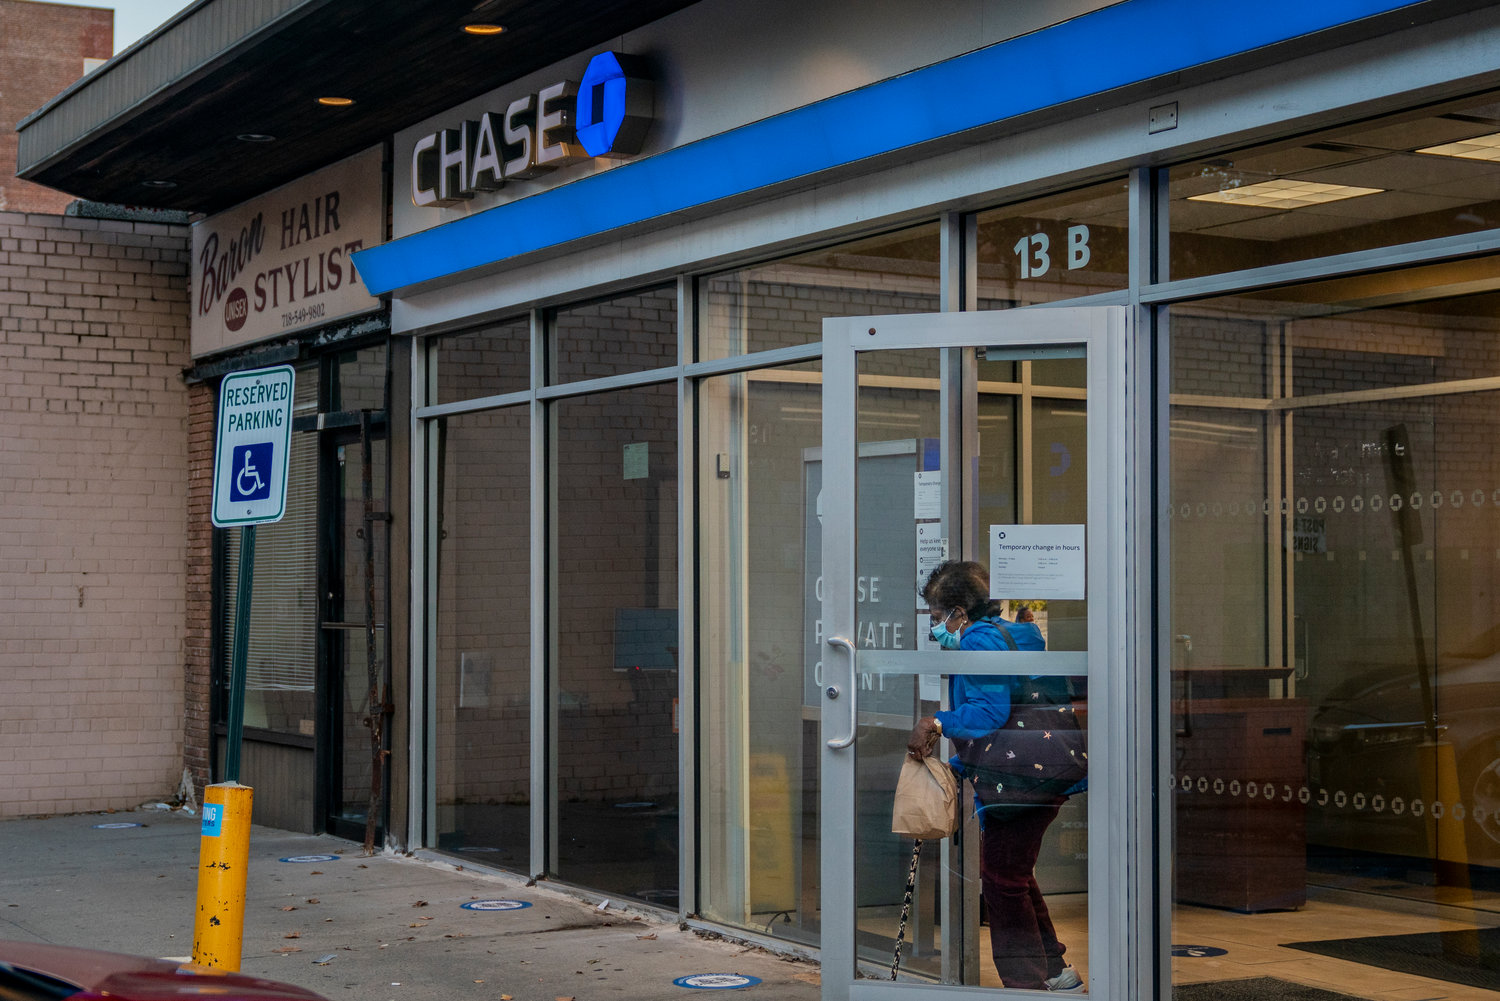 Low foot traffic, nearby branches, and more customers using online services all contribute to the decision to close a branch — but neighbors say the Knolls Crescent location of Chase Bank is critical for older customers and small businesses making cash deposits.